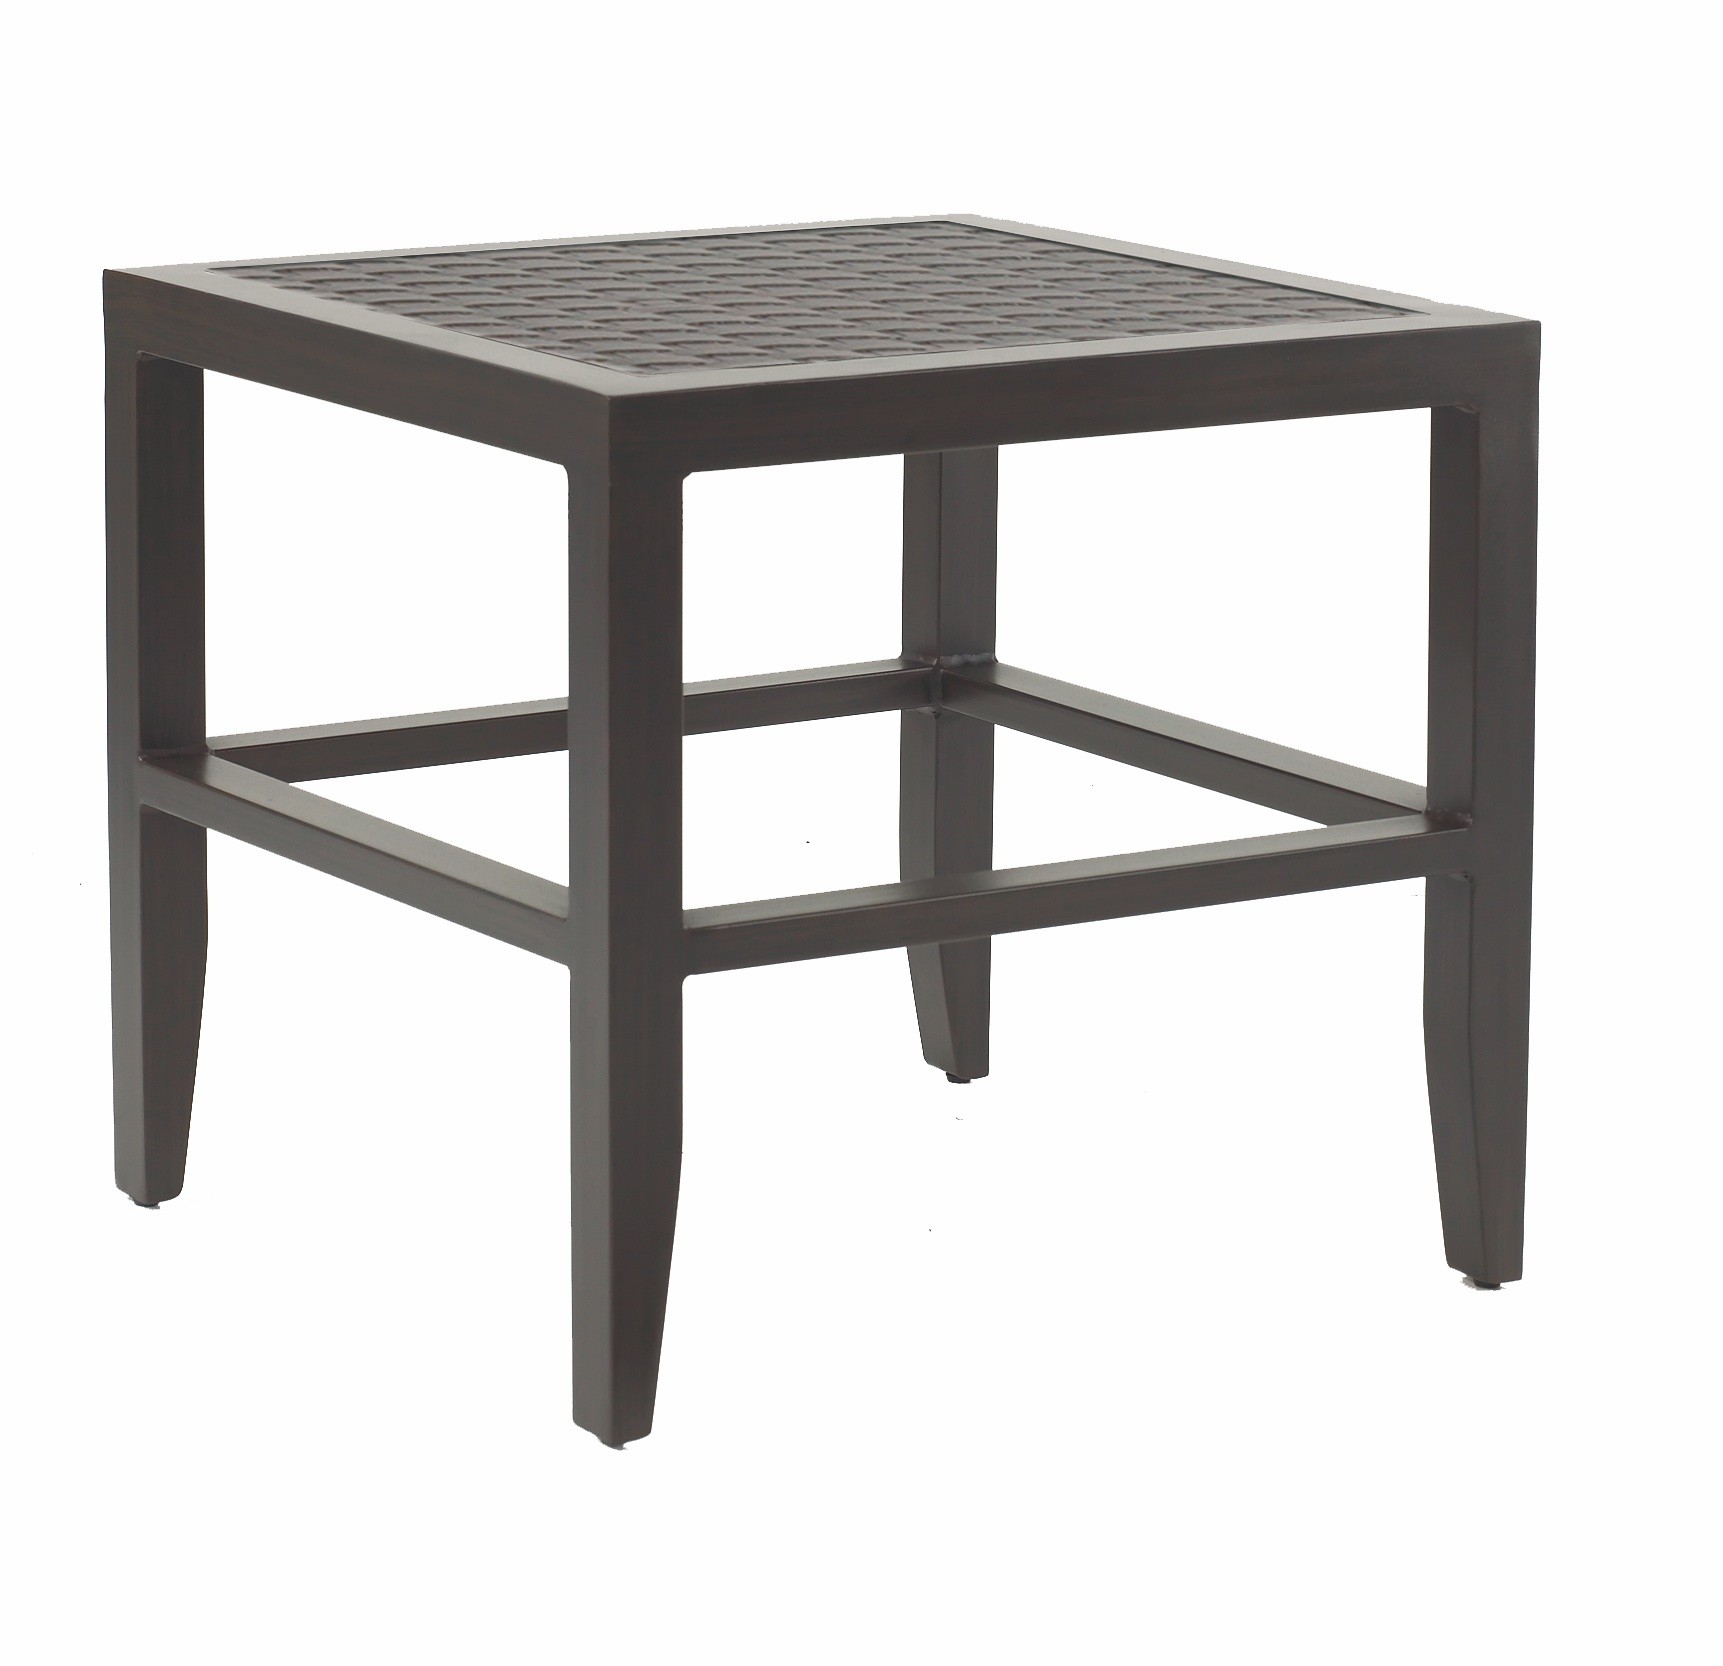 CLASSICAL SQUARE END TABLE
SSS20
SPEC SHEET
